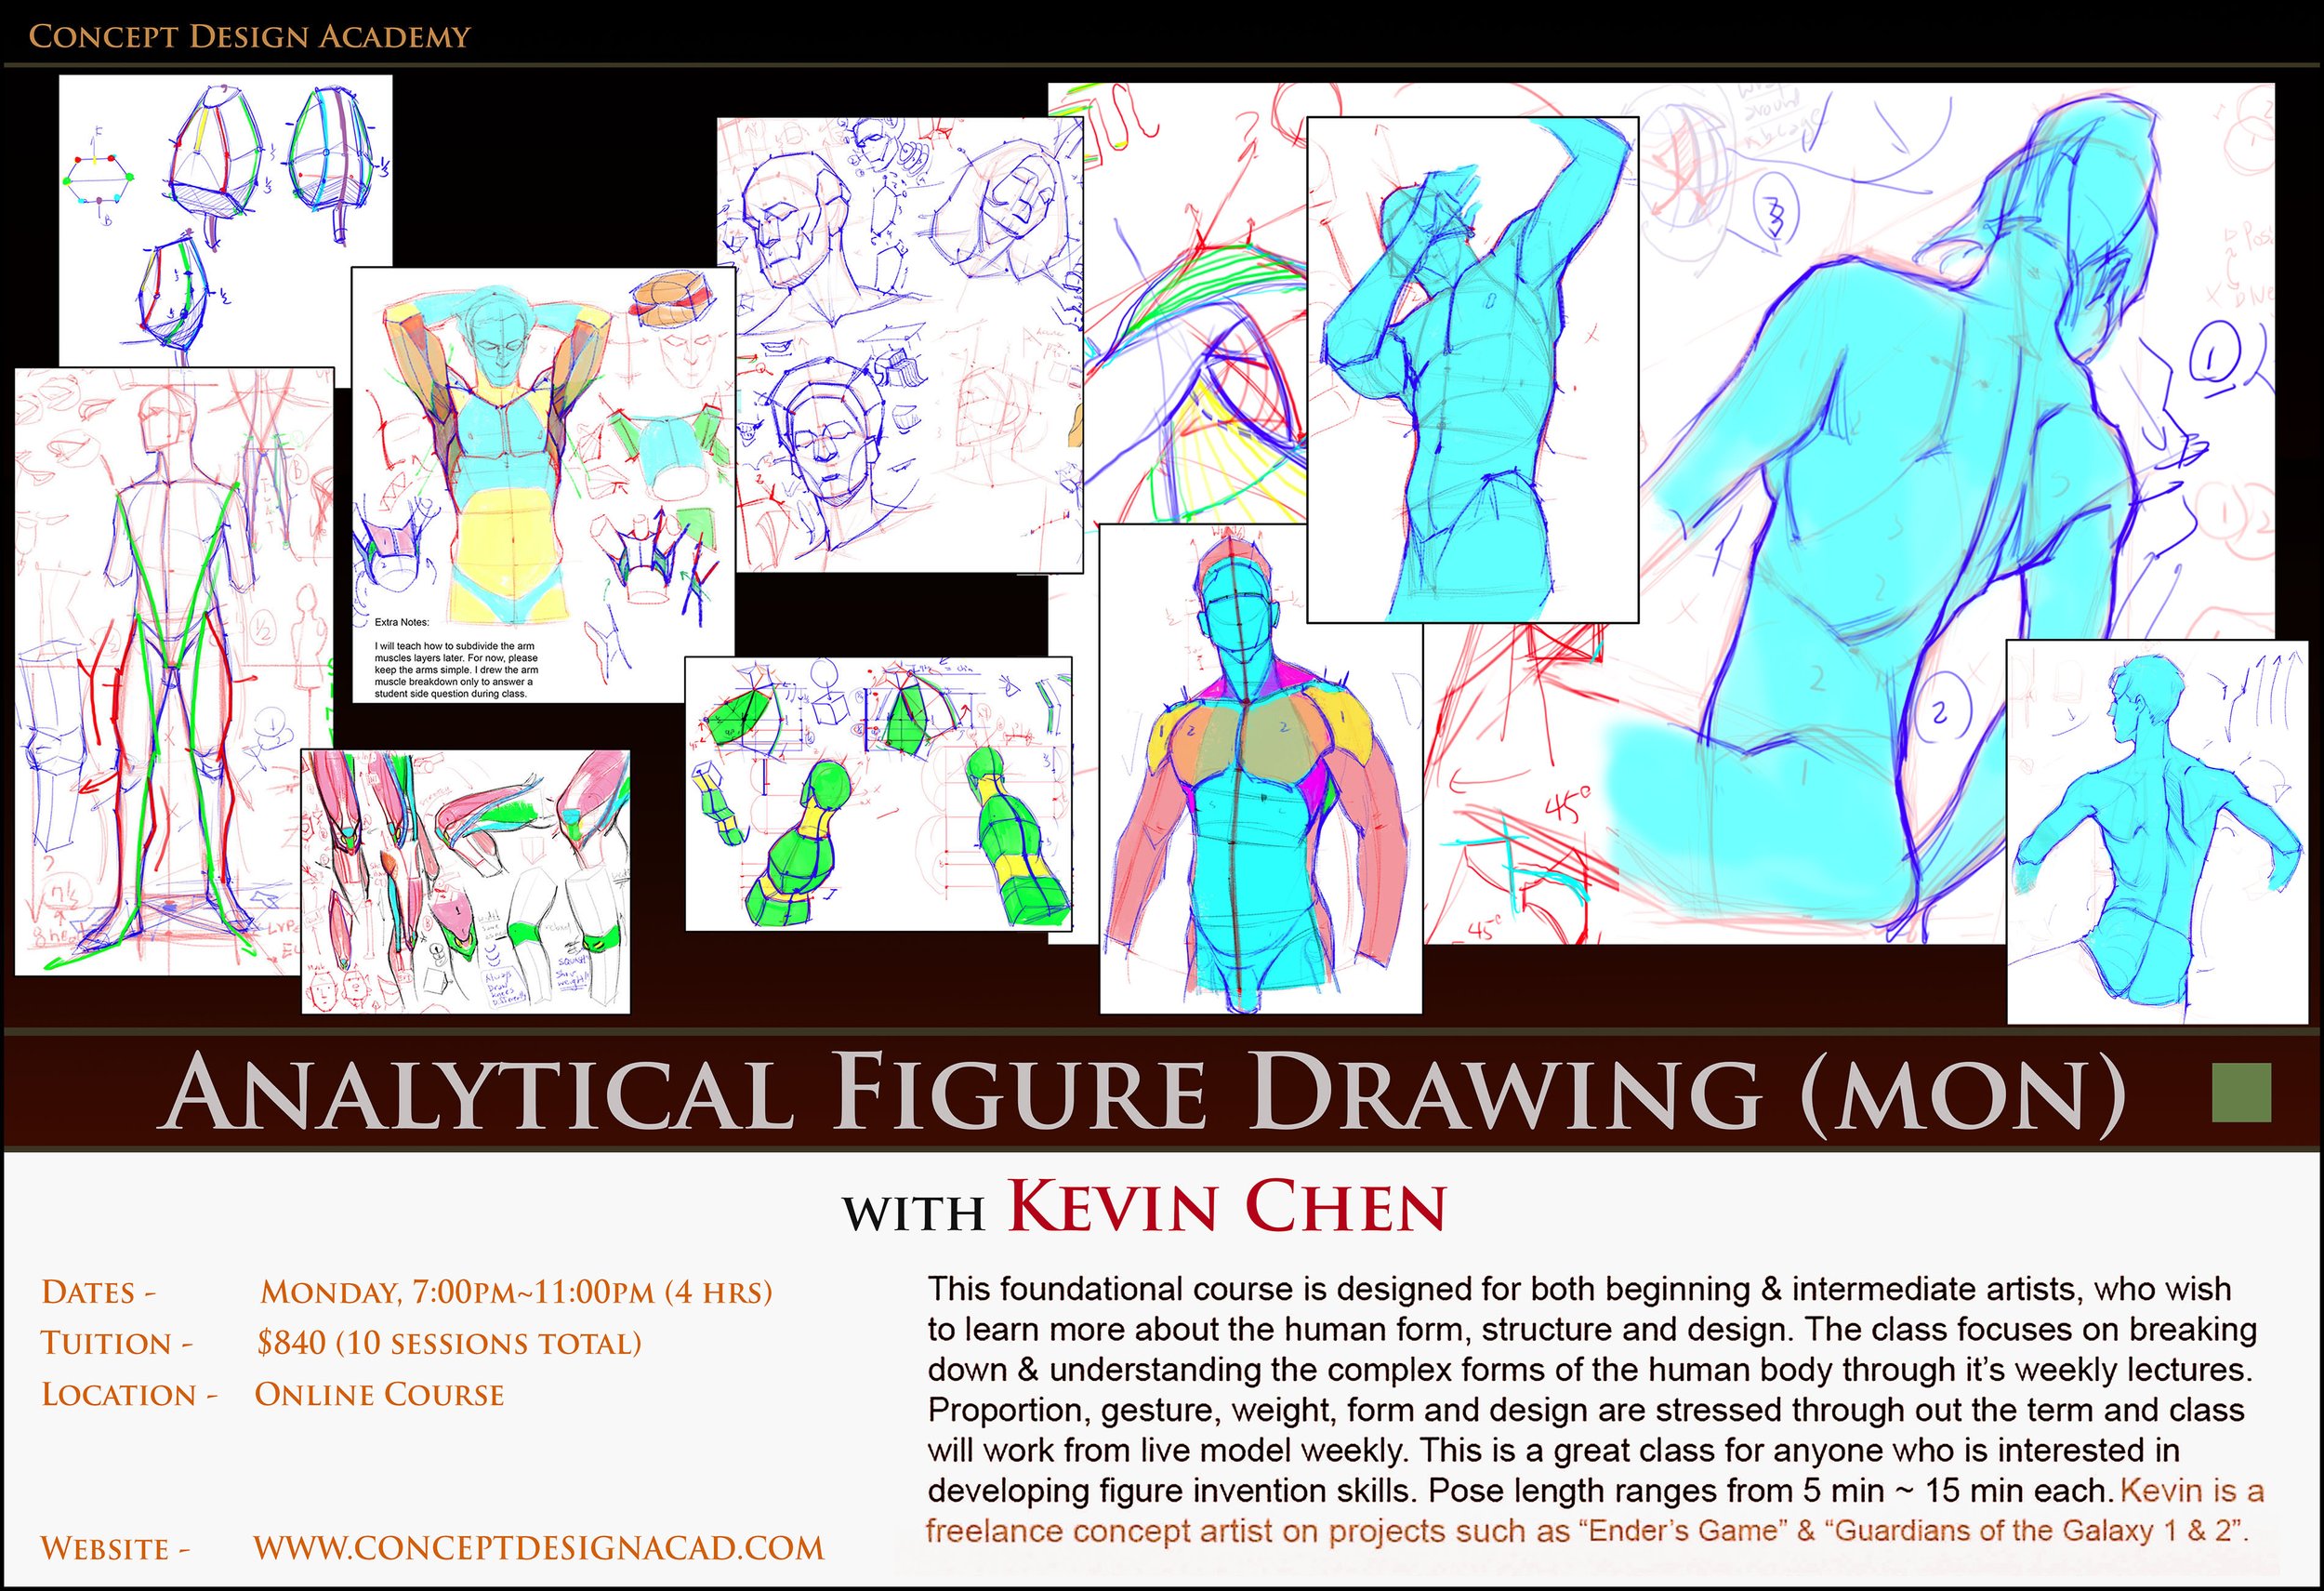 SP24 - Analytical Figure Drawing MON with Kevin Chen.jpg